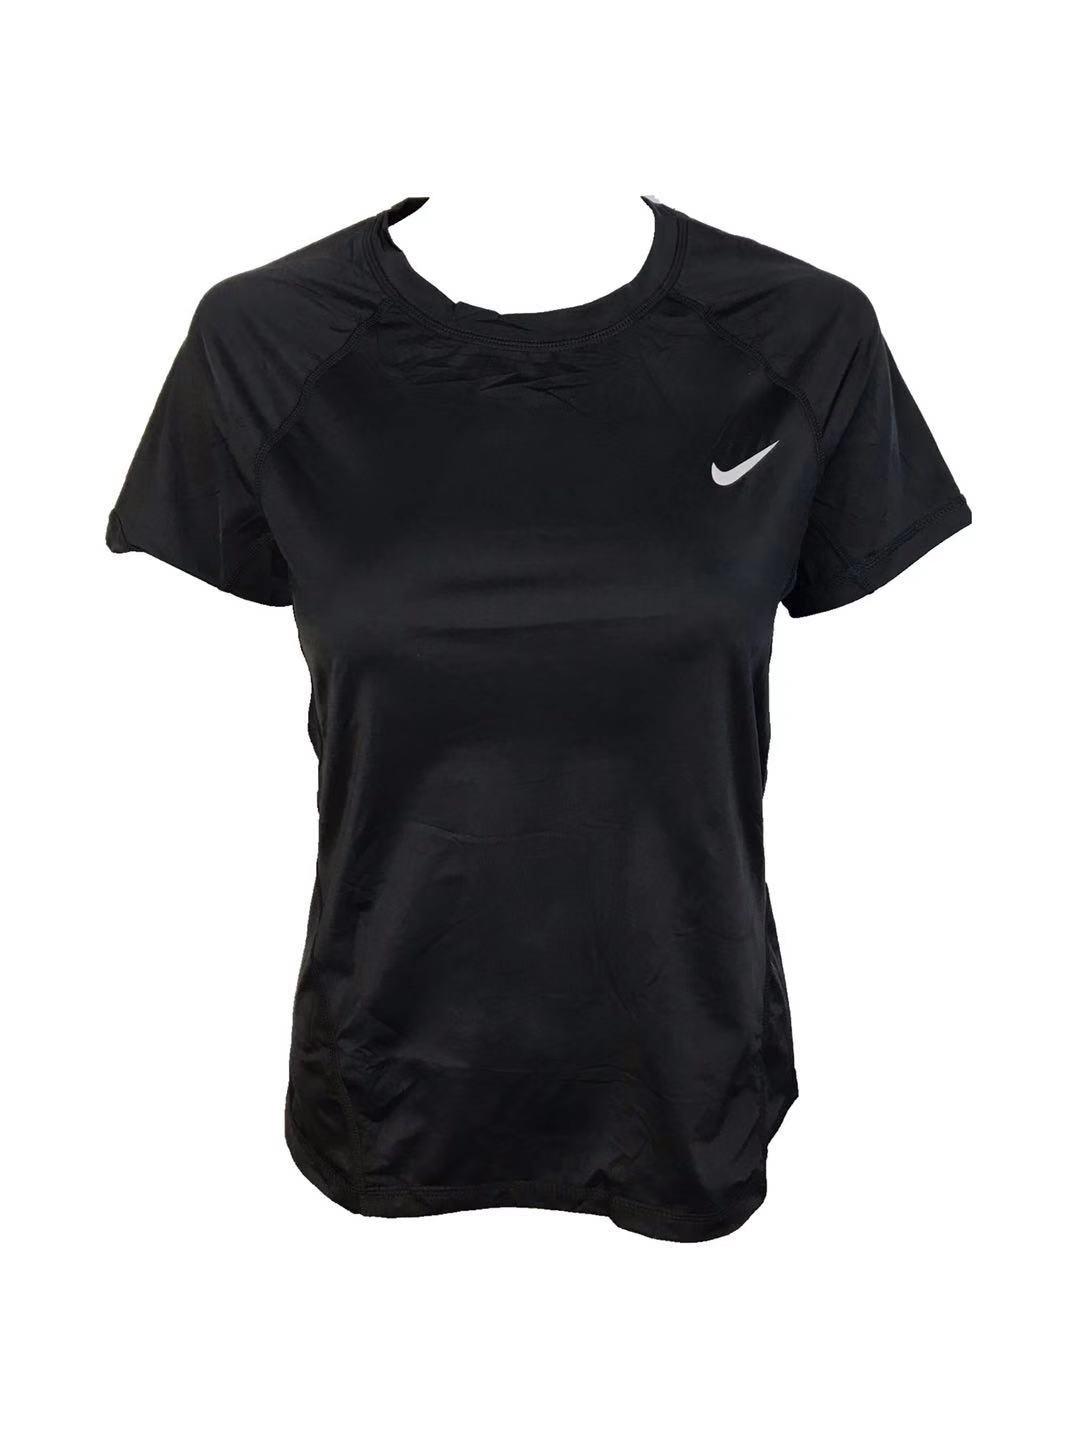 NW.2808#Short Sleeve Athletic Dry Fit 